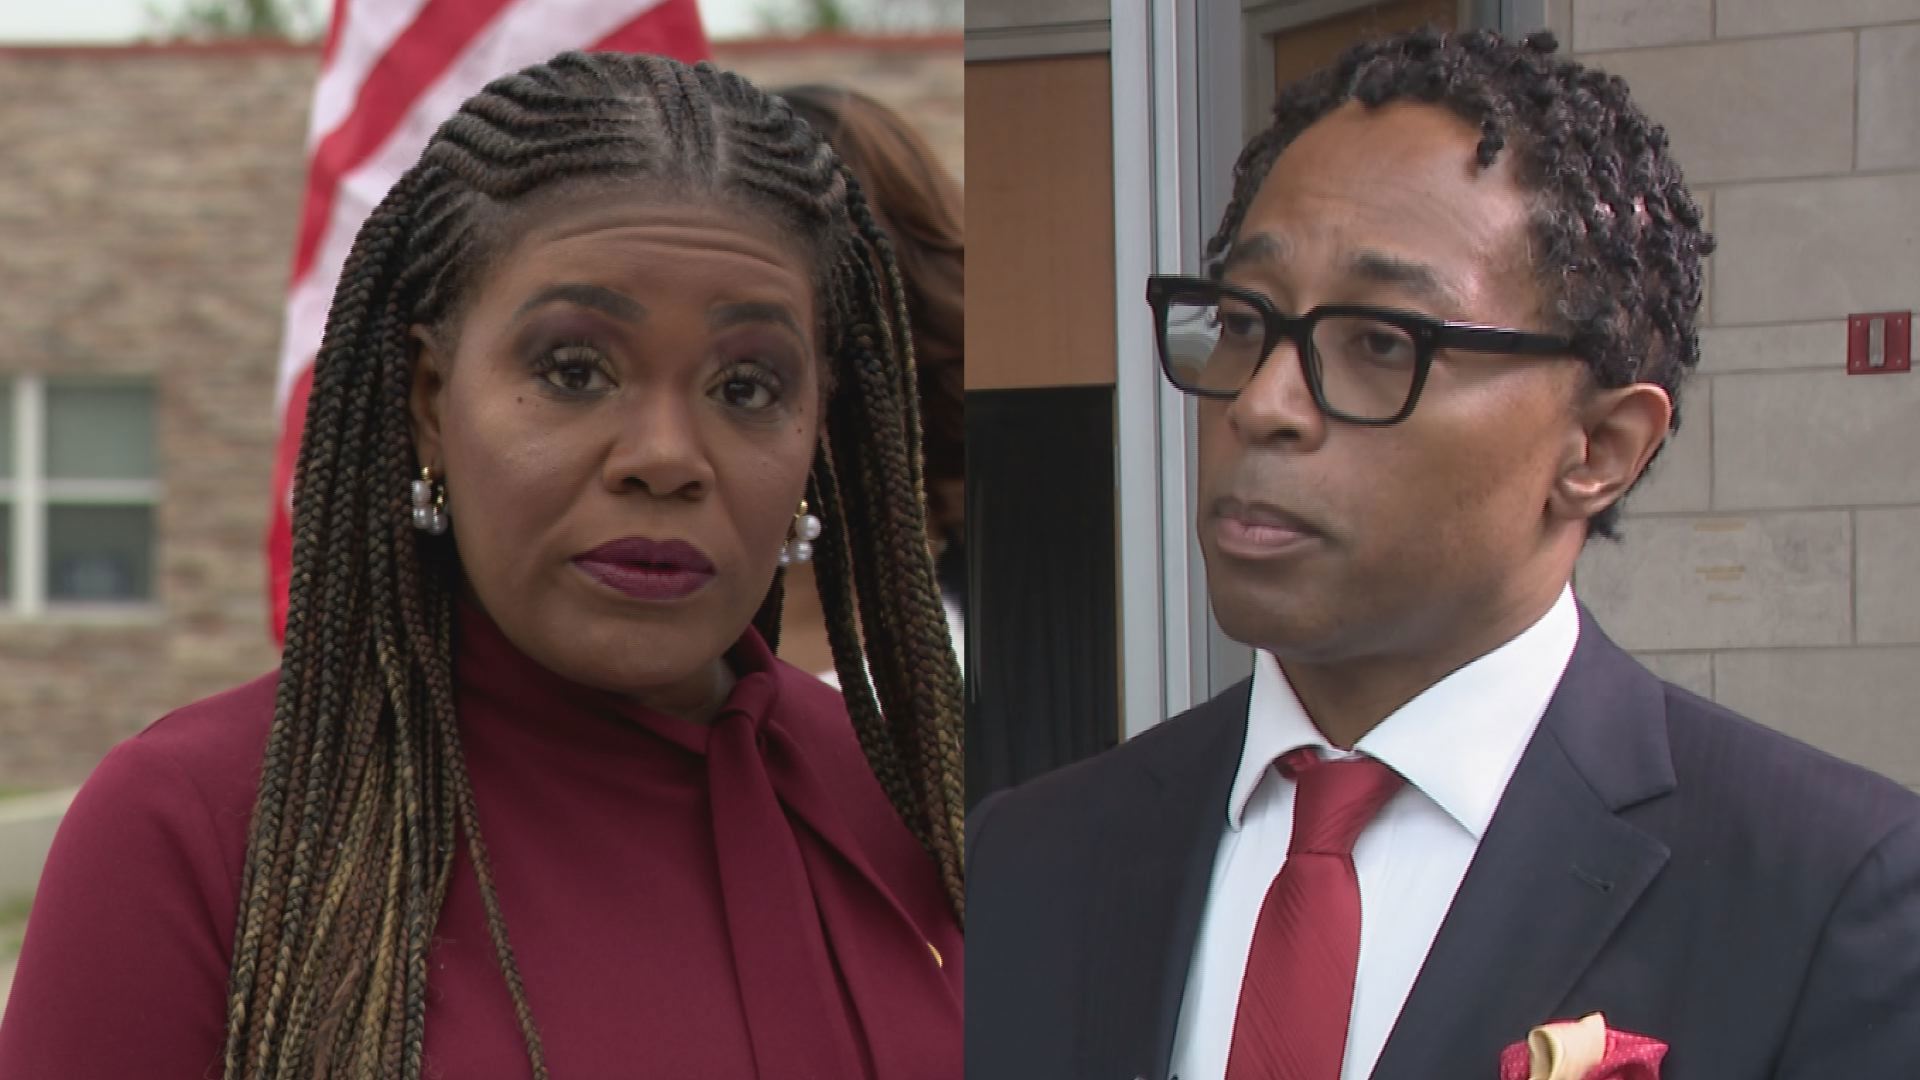 The Missouri primary is scheduled for Aug. 6. St. Louis County Prosecutor Wesley Bell is challenging incumbent Cori Bush.